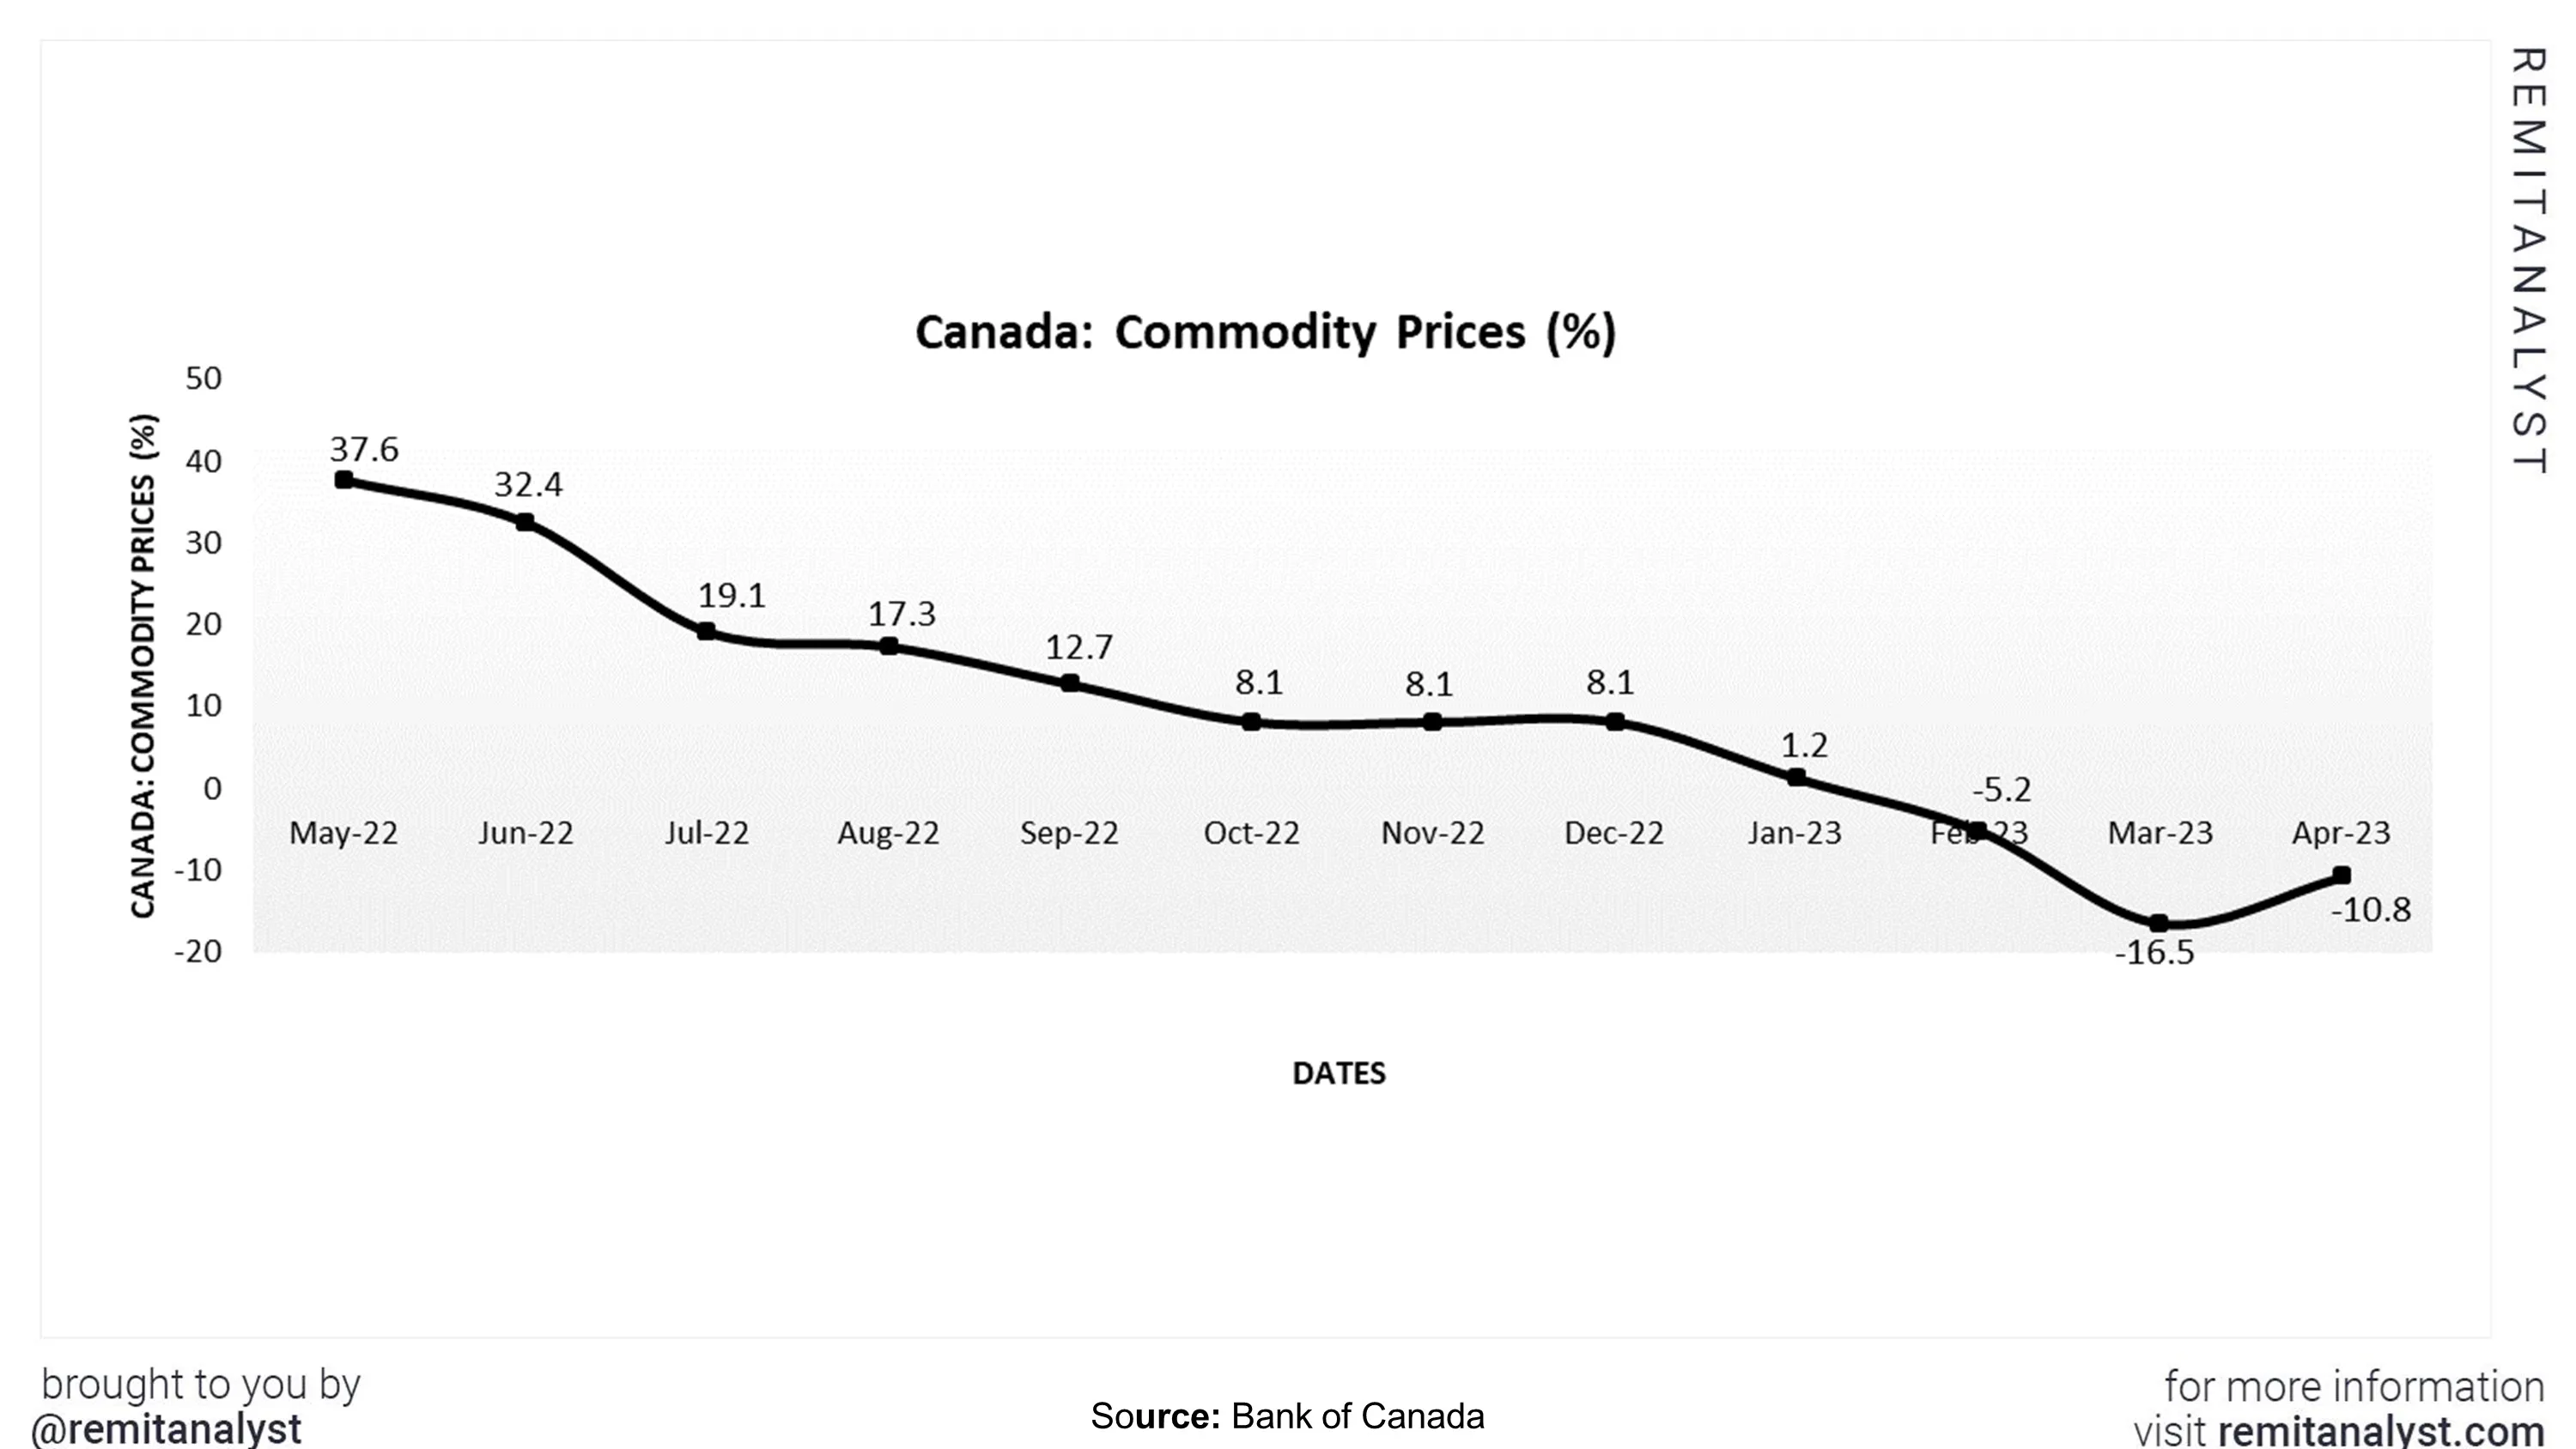 commodity-prices-canada-from-may-2022-to-apr-2023